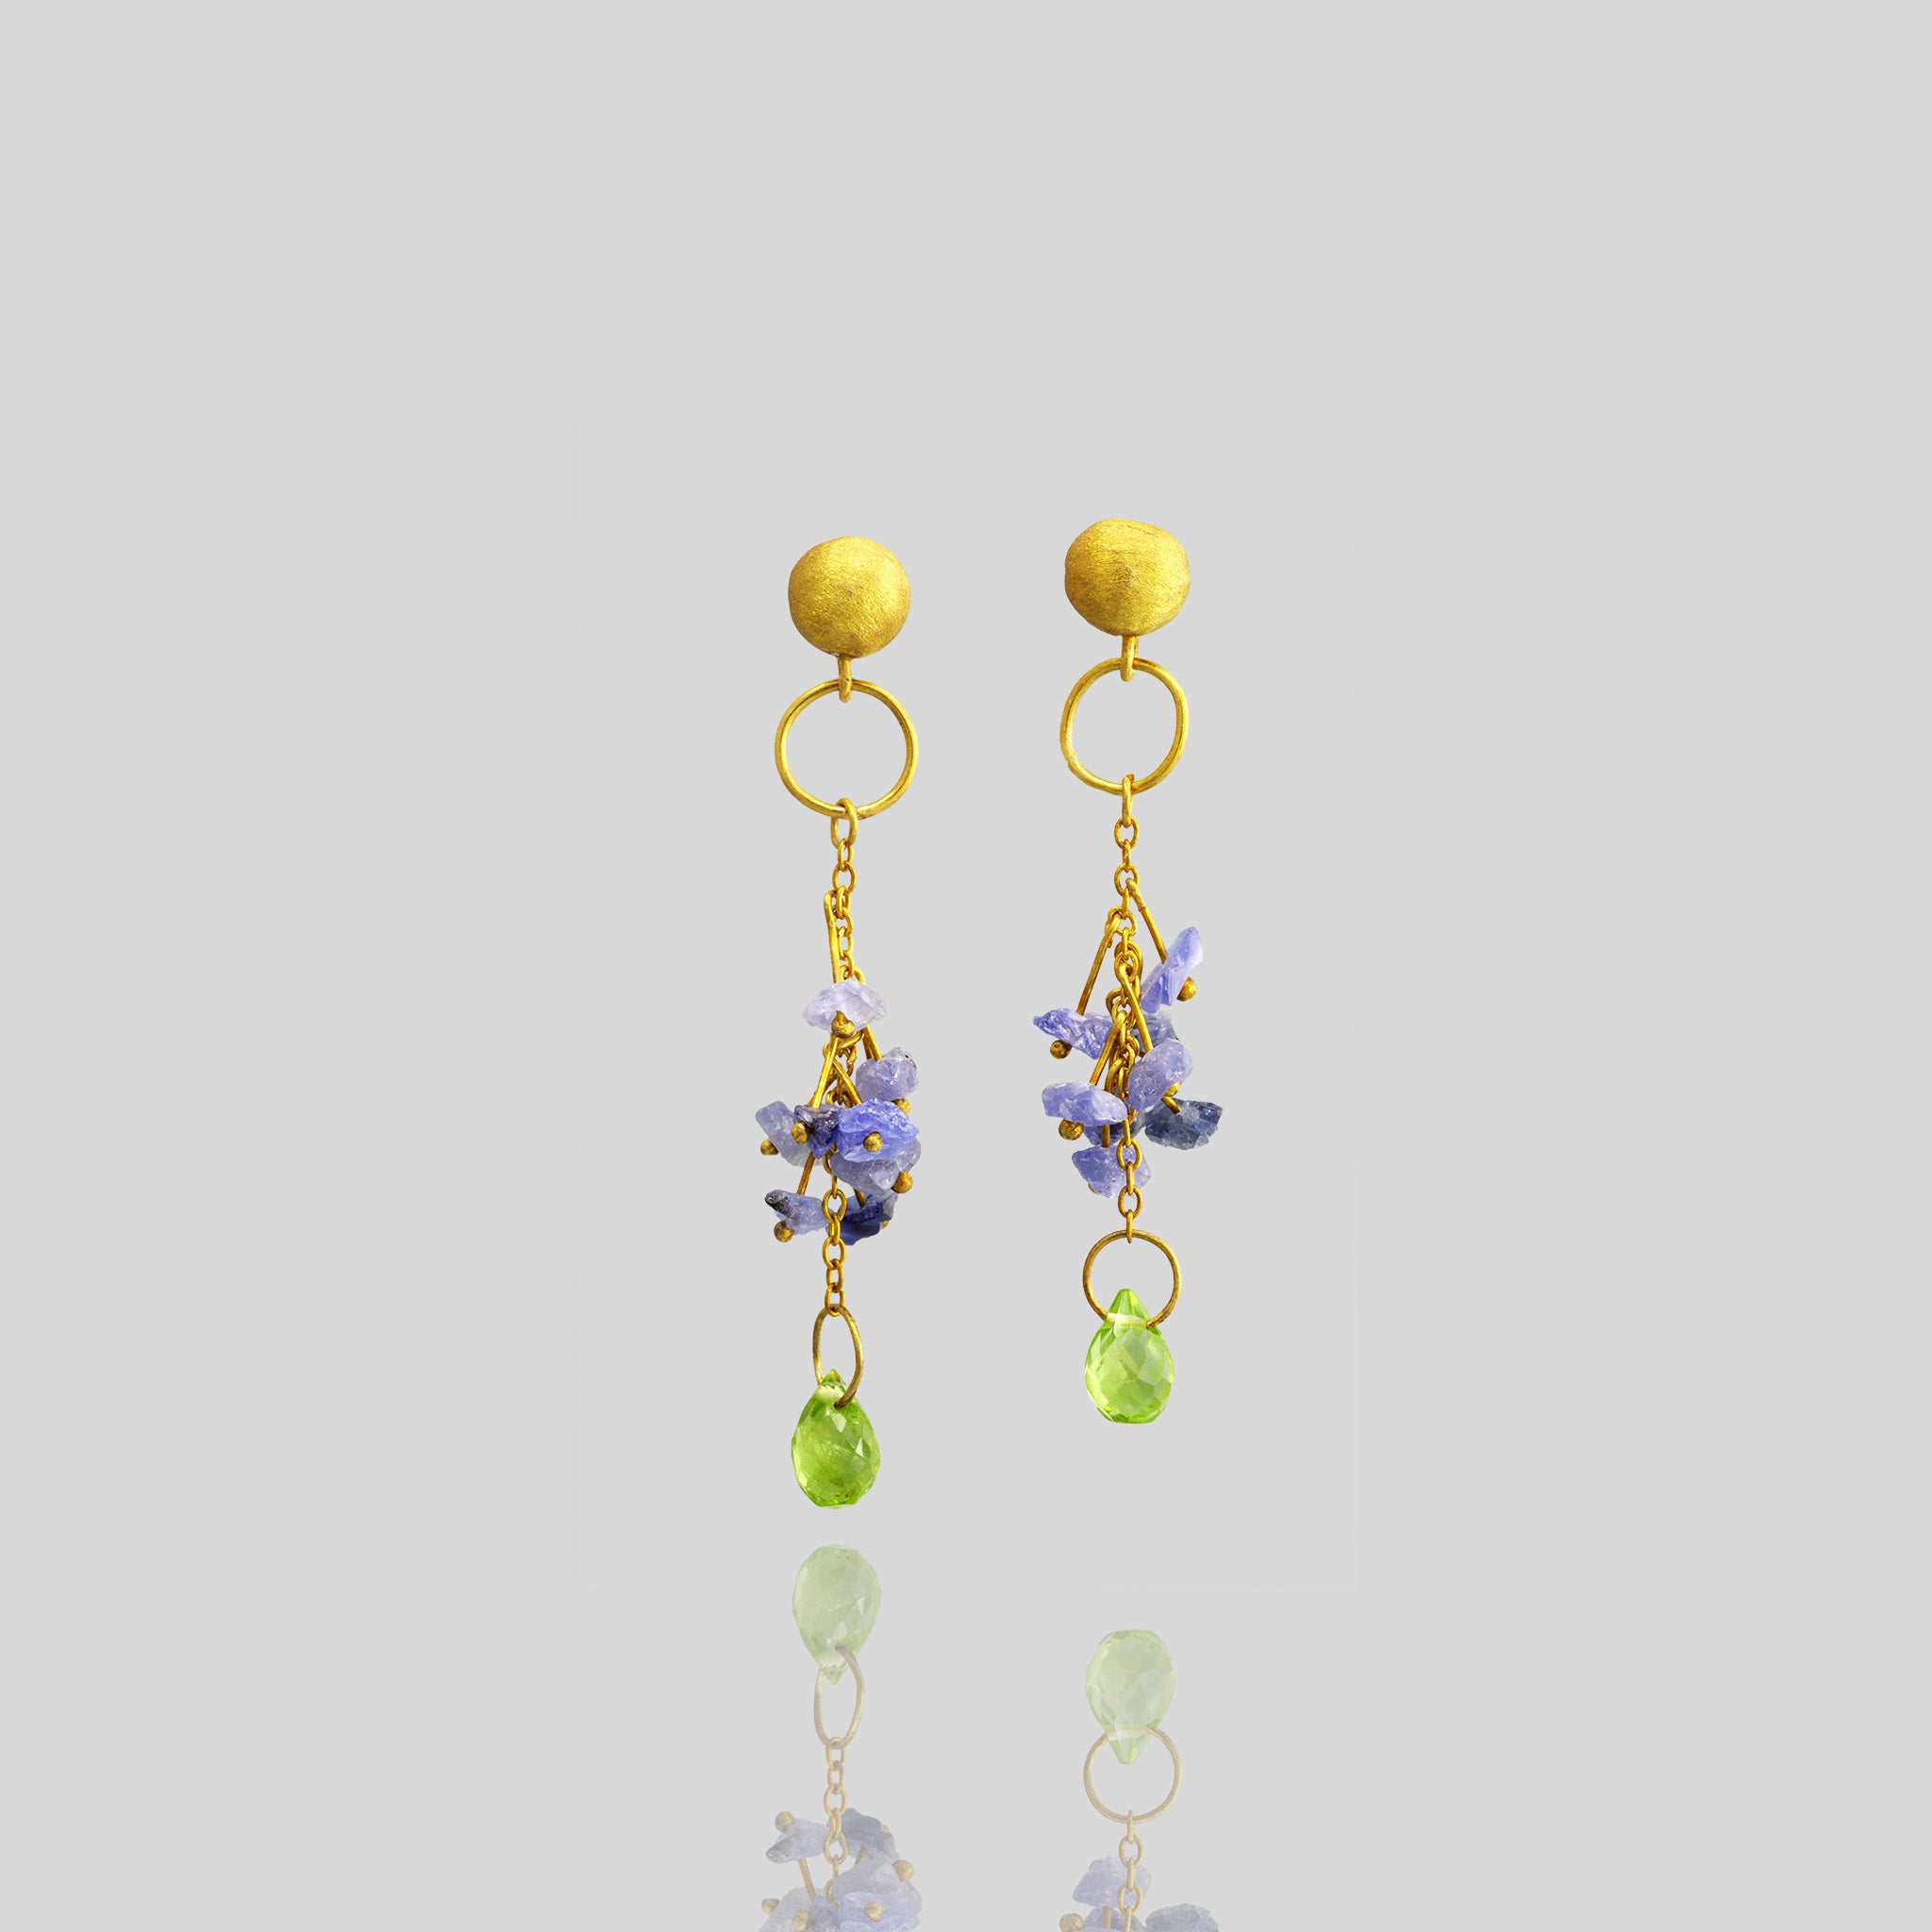 Timeless elegance meets luxury in these Yellow Gold earrings adorned with raw blue sapphires and a dangling Peridot drop.